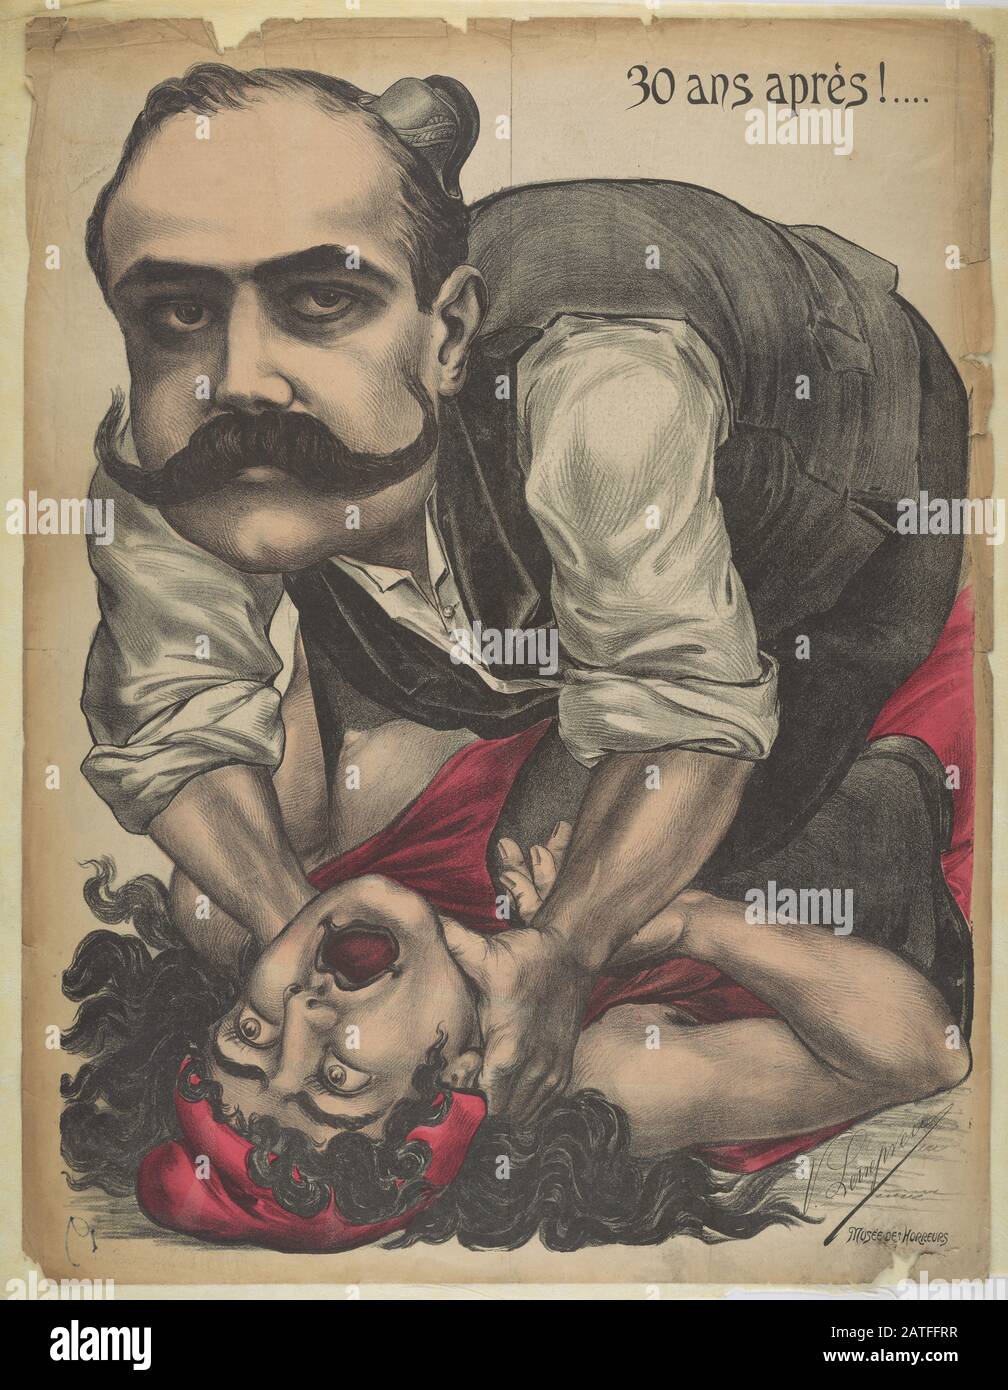 Musée des Horreurs -  30 ans après!...  -  1899  -  Lenepveu, V.  -  Caricature of Alfred Dreyfus (1859-1936) strangling Marianne, the personification of France. This is an unnumbered caricature in the Musée des Horreurs series. Hand colored. Stock Photo